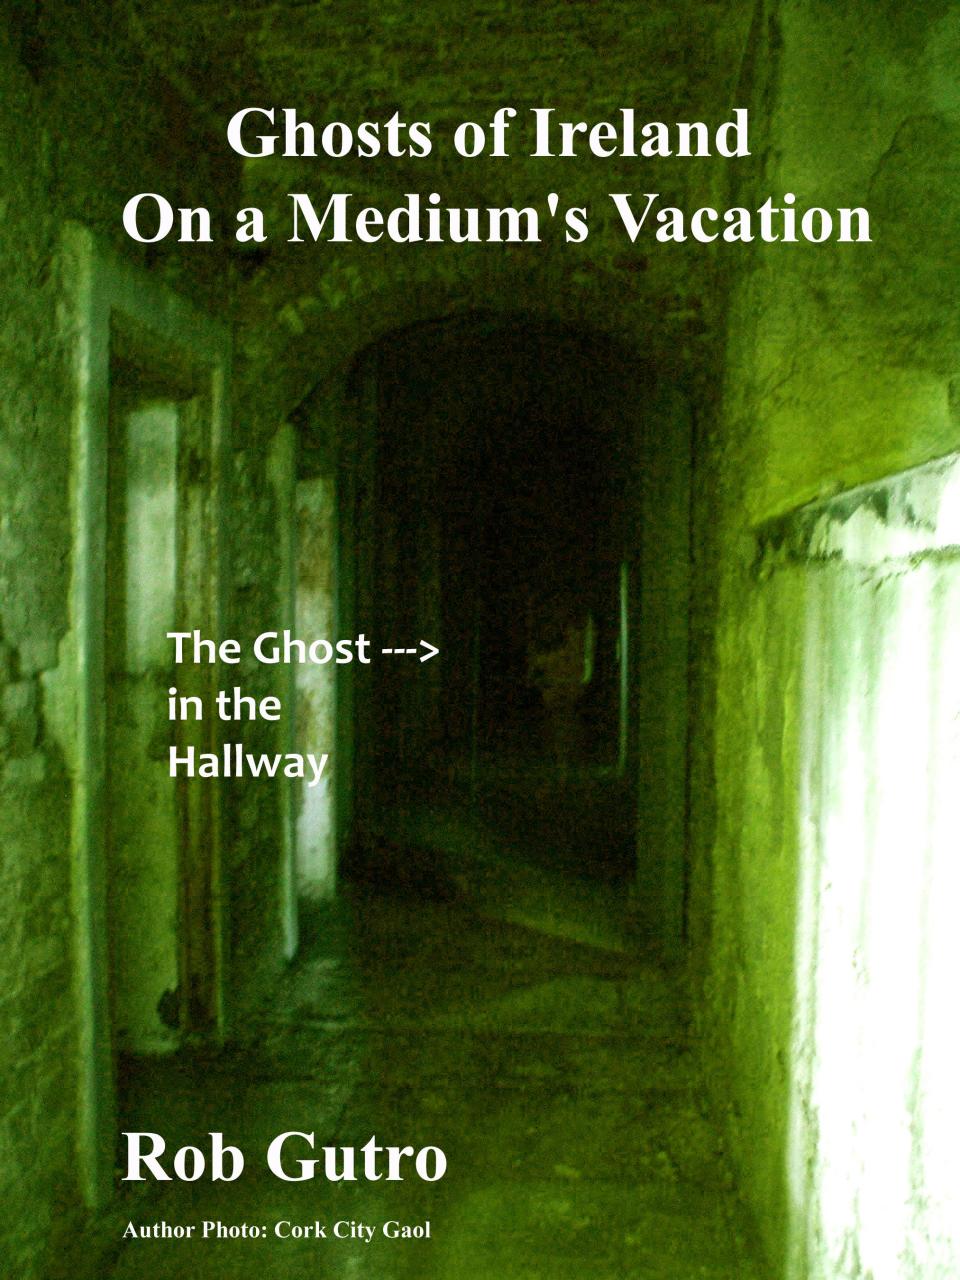 'Ghosts of Ireland: On a Medium's Vacation' book cover